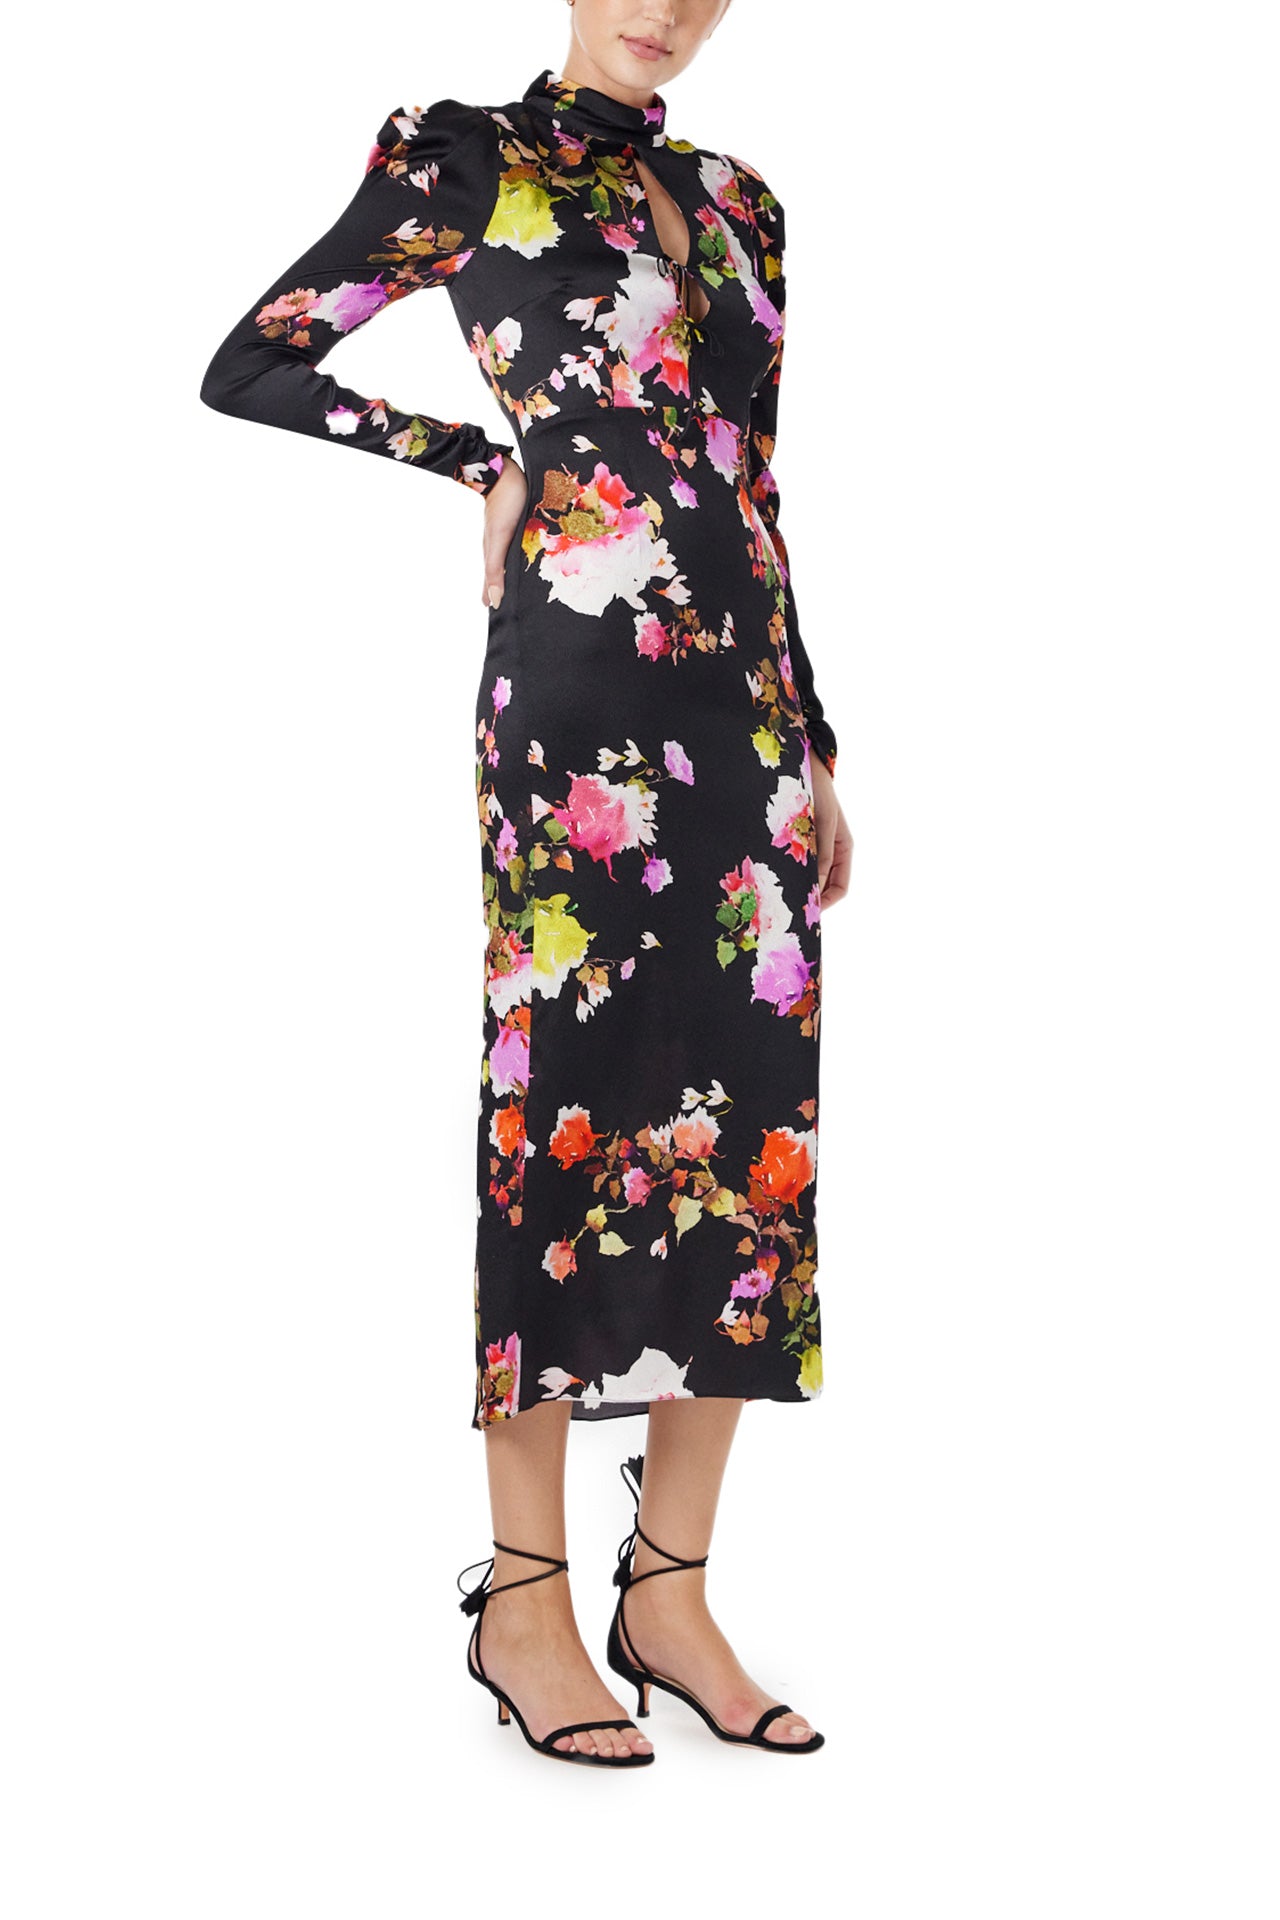 Monique Lhuillier Spring 2024 long sleeve midi dress with high neck and tied front keyhole bodice in black floral hammered silk - right.